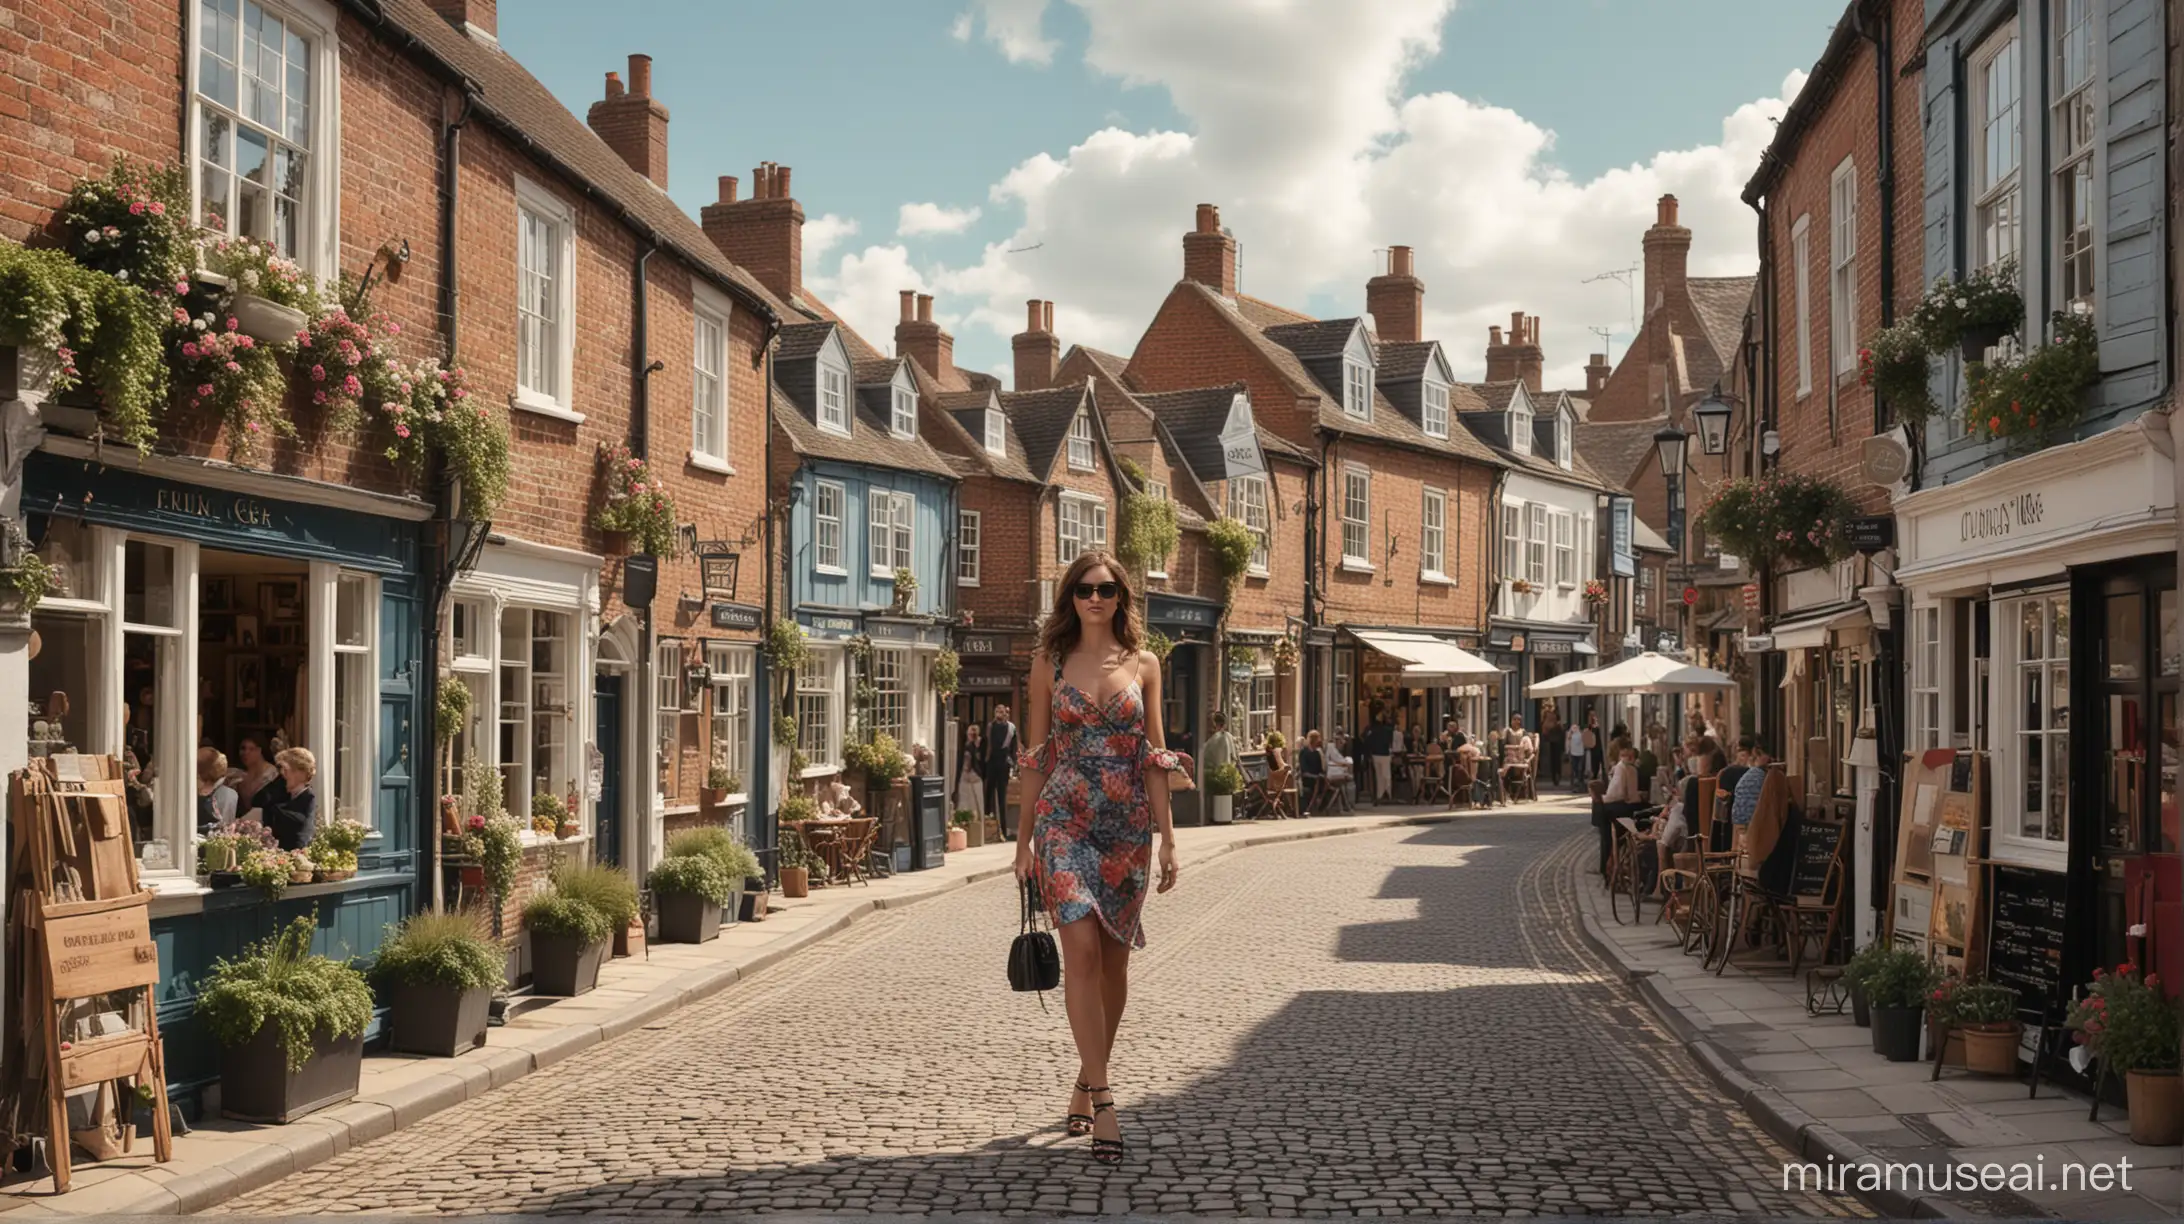 Show me a realistic image of the town of Sandwich, UK having a high couture super fun and over the top fashion show in their streets